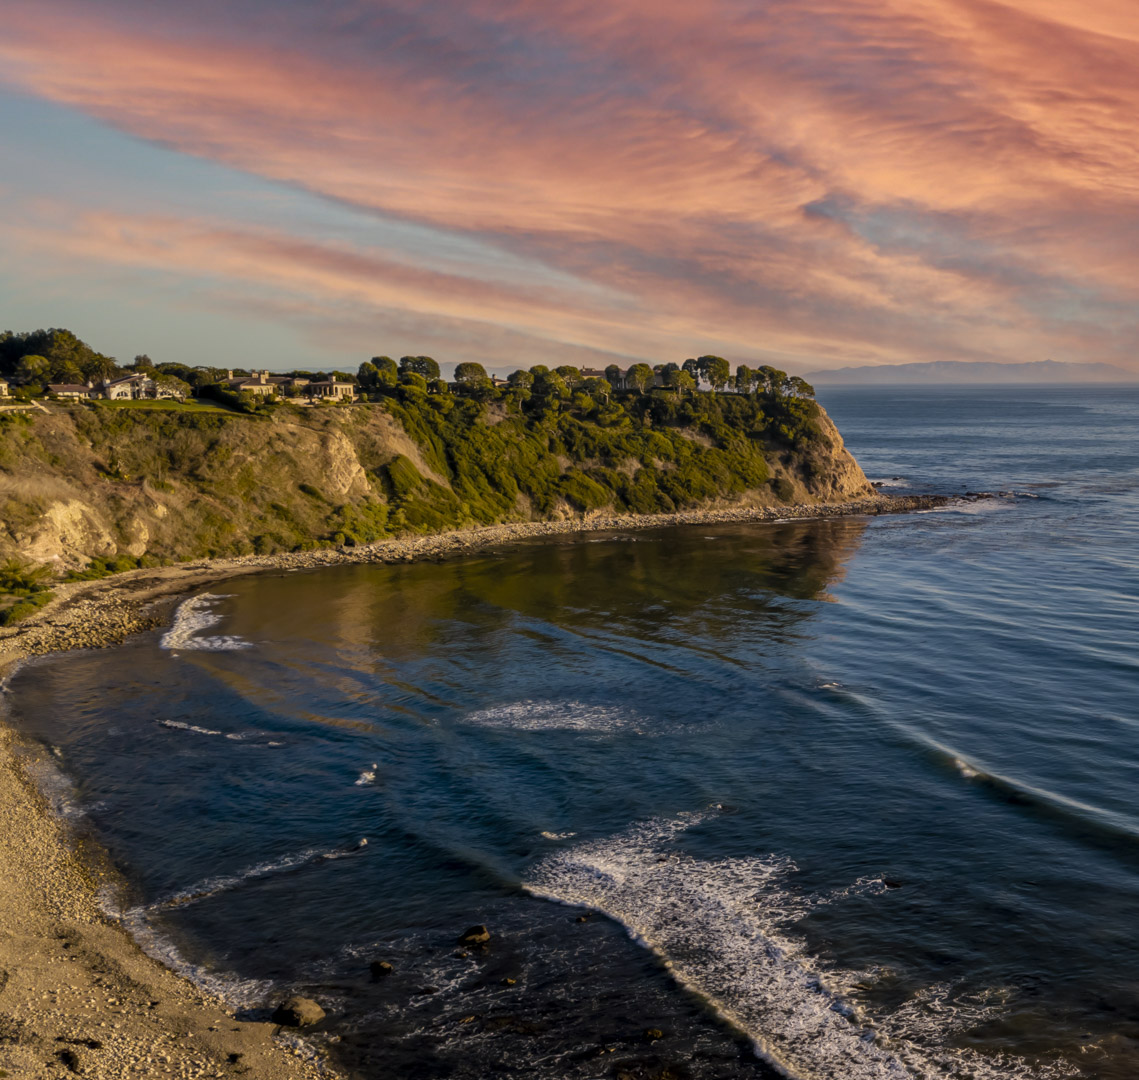 The Coast of Palos Verdes  by Don Stouder